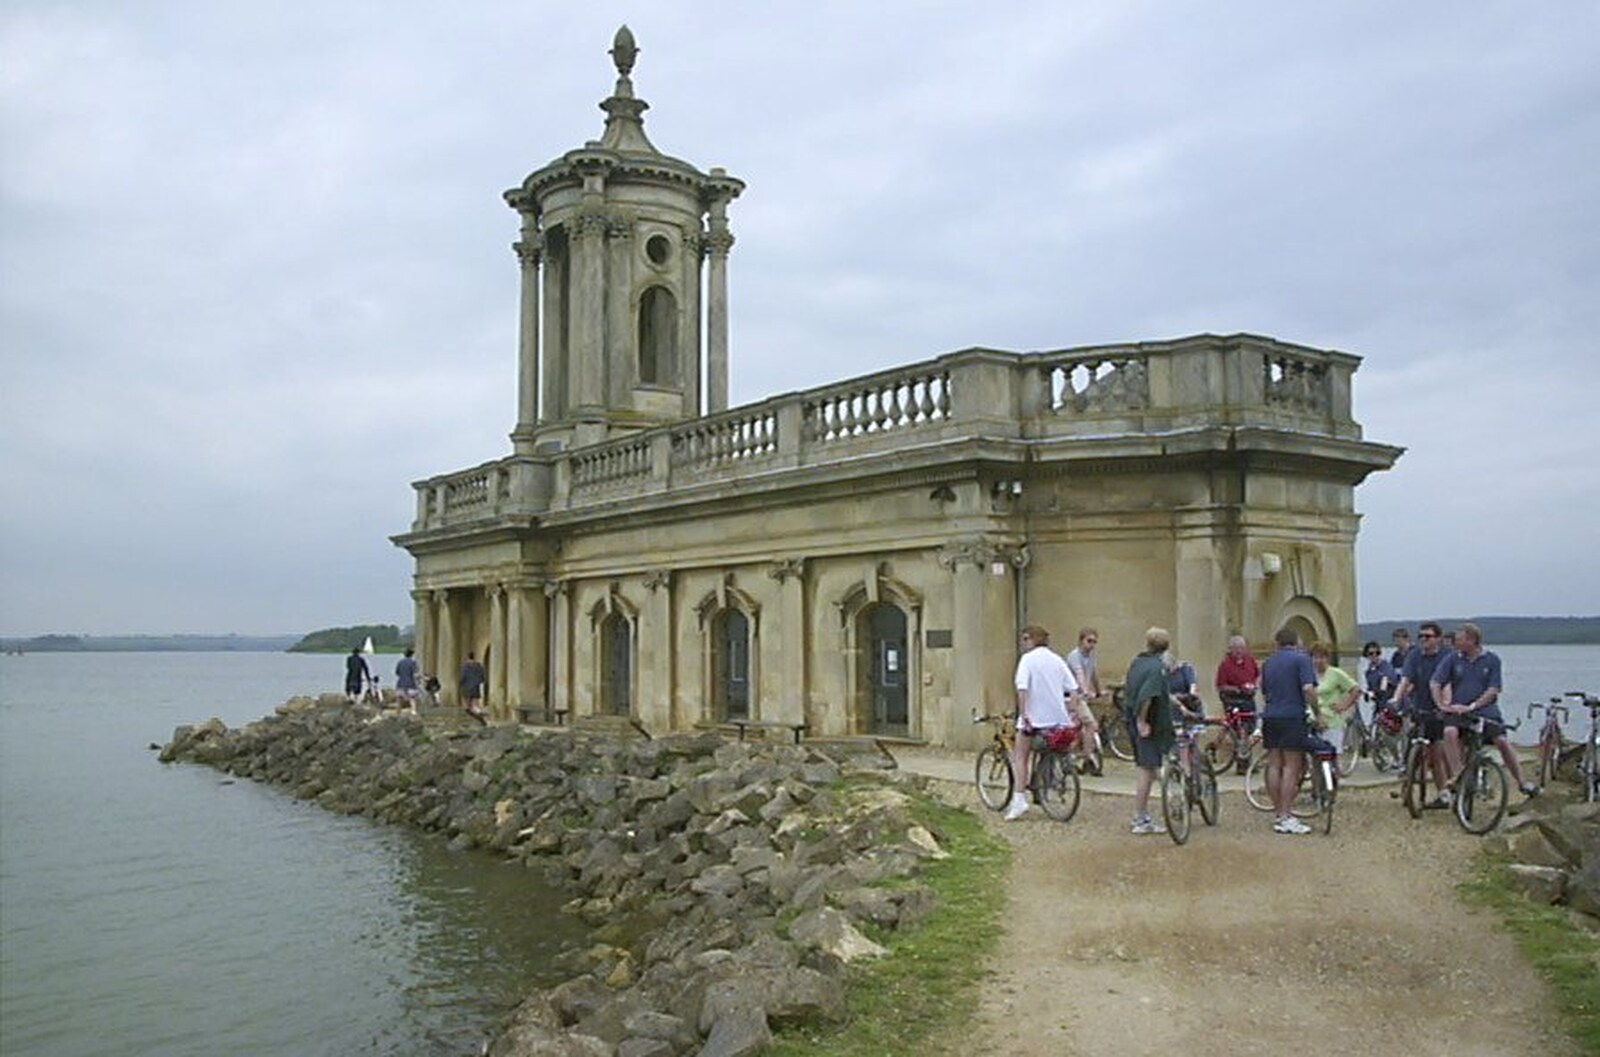 Normanton church from The BSCC Annual Bike Ride, Marquess of Exeter, Oakham, Rutland - 12th May 2001